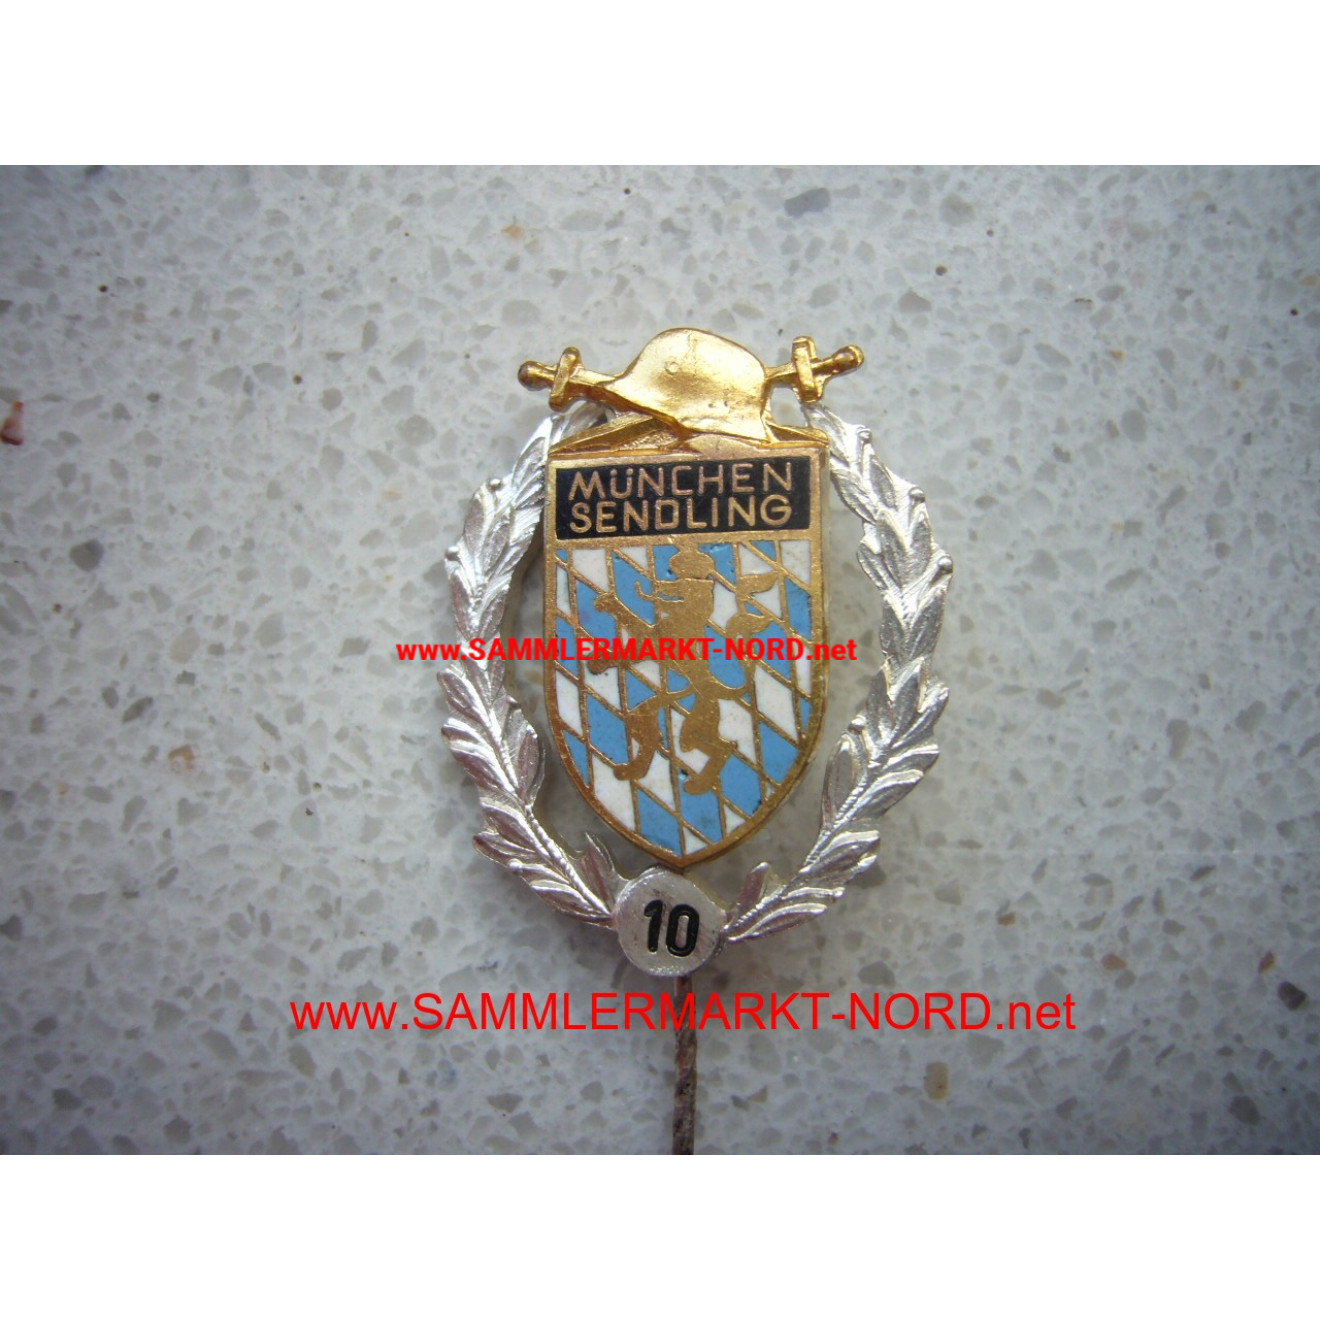 Soldier camaraderie Munich Sendling - Badge of Honor for 10 year